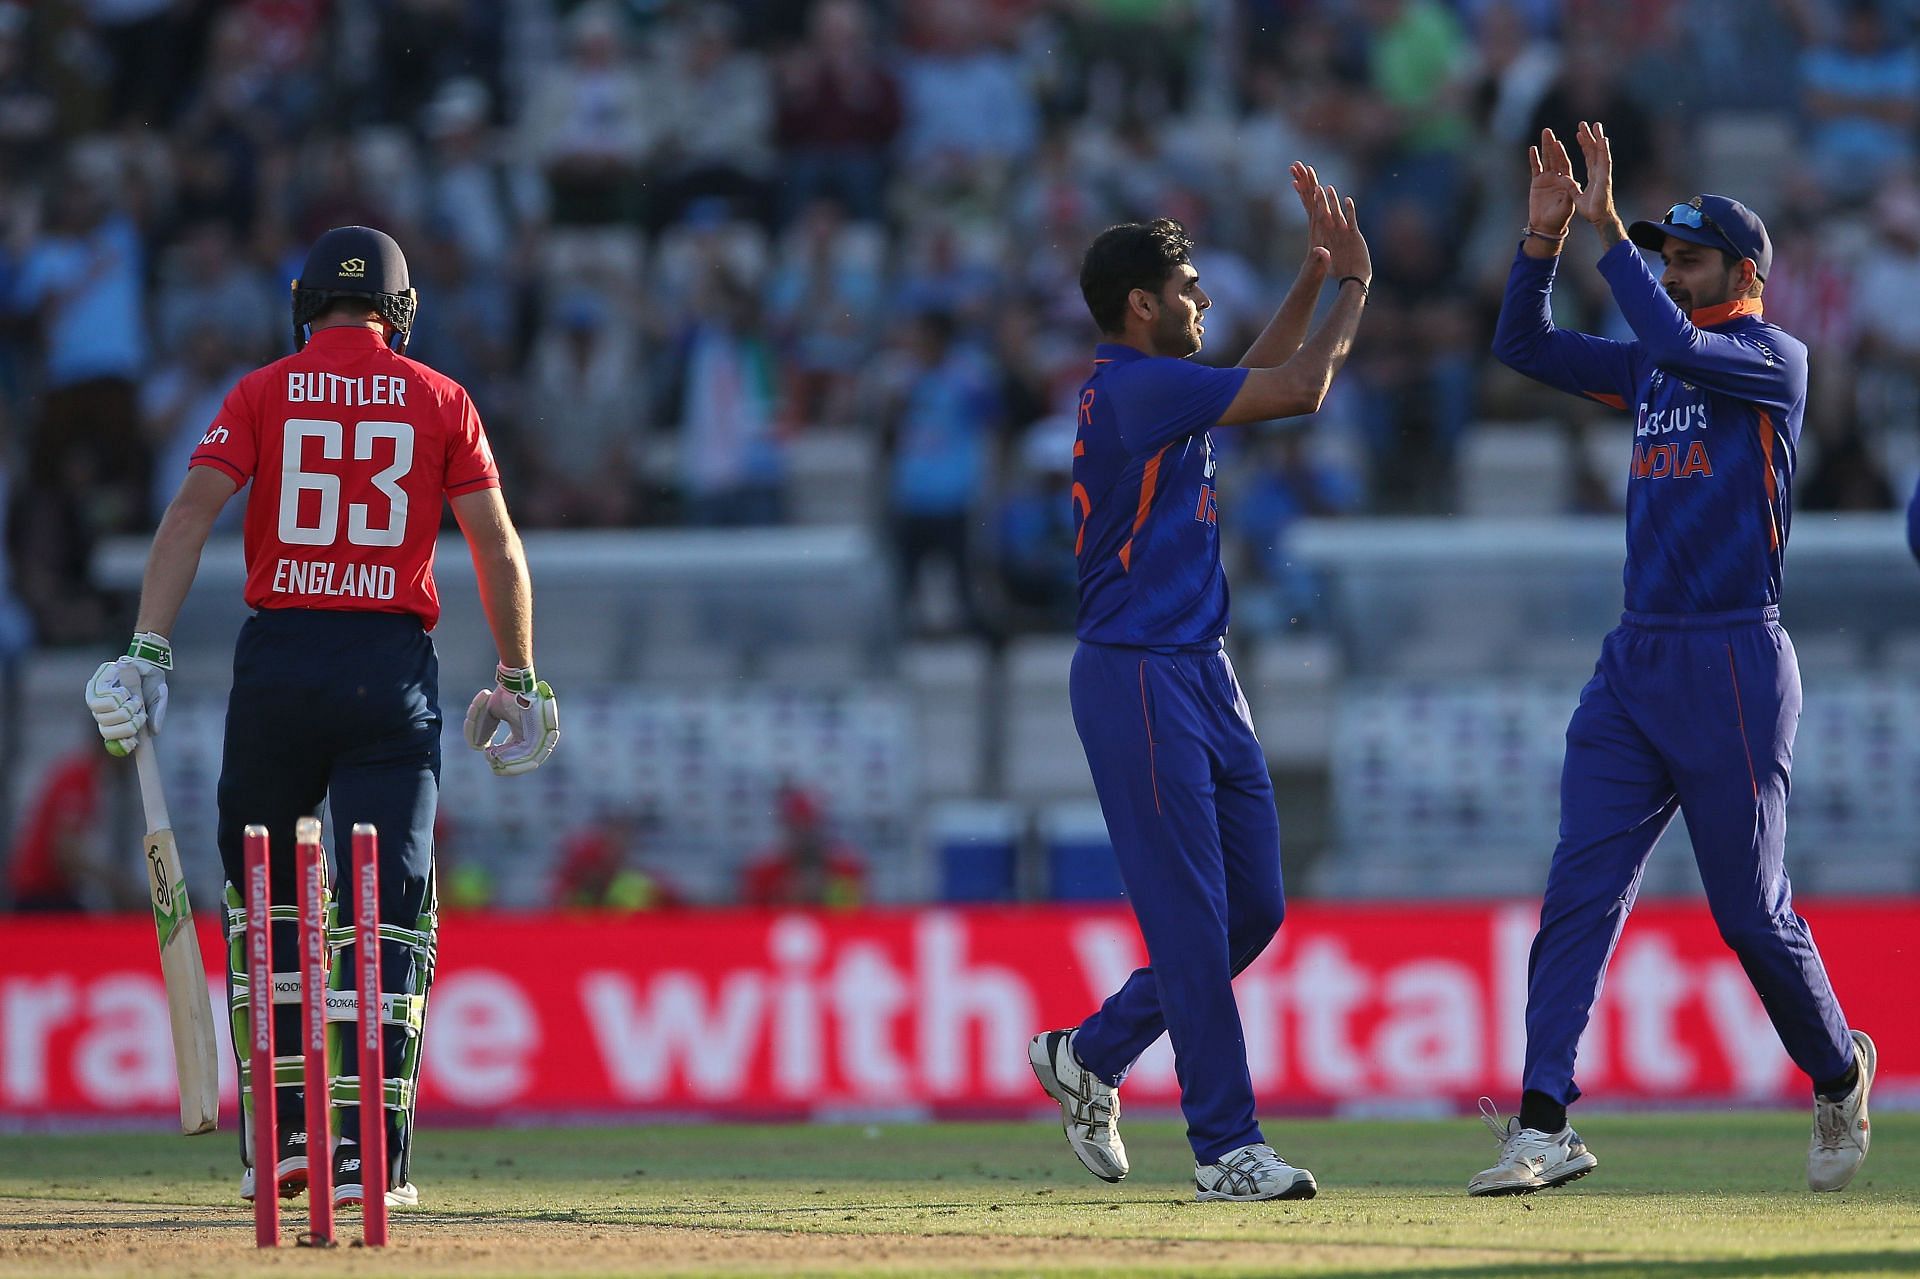 Bhuvneshwar Kumar celebrates after taking the wicket of Jos Buttler. Pic: Getty Images